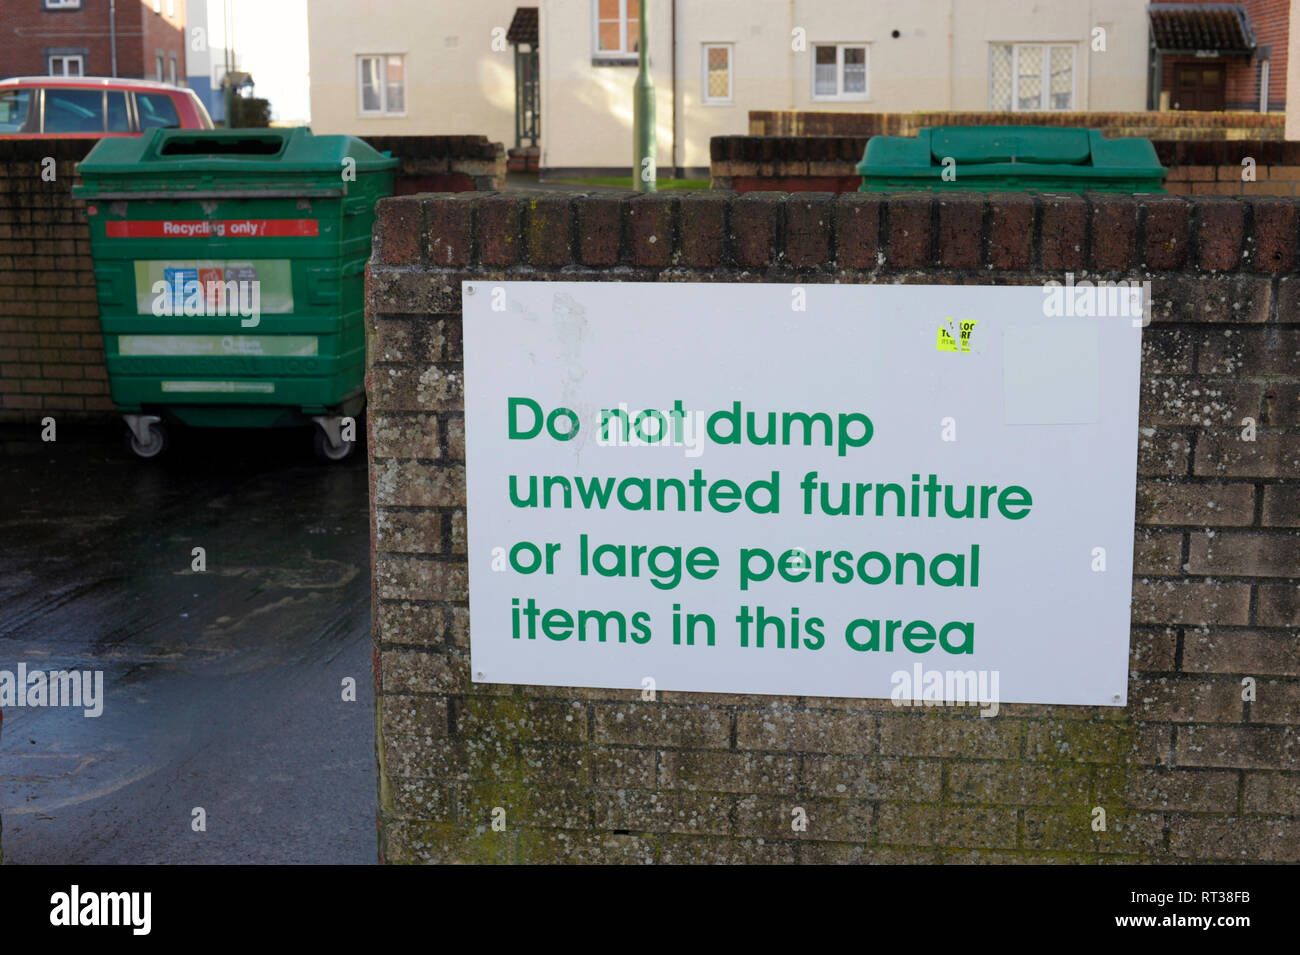 Do not dump unwanted furniture or large personal items in the area sign in residential area of Plymouth Devon England UK Stock Photo